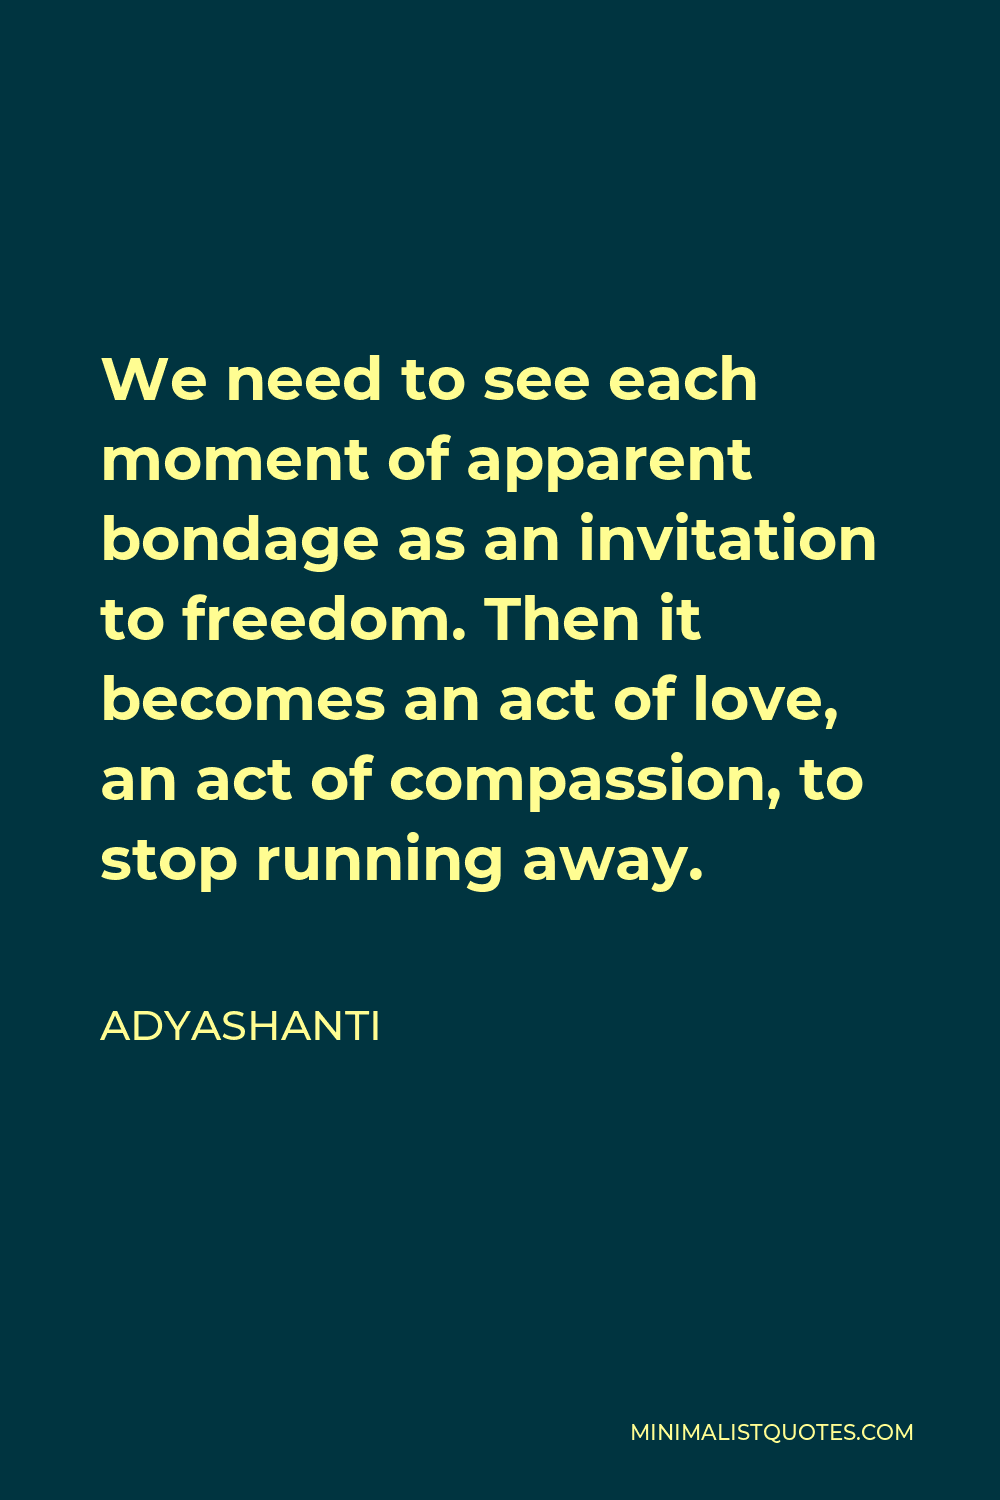 Adyashanti Quote - We need to see each moment of apparent bondage as an invitation to freedom. Then it becomes an act of love, an act of compassion, to stop running away.